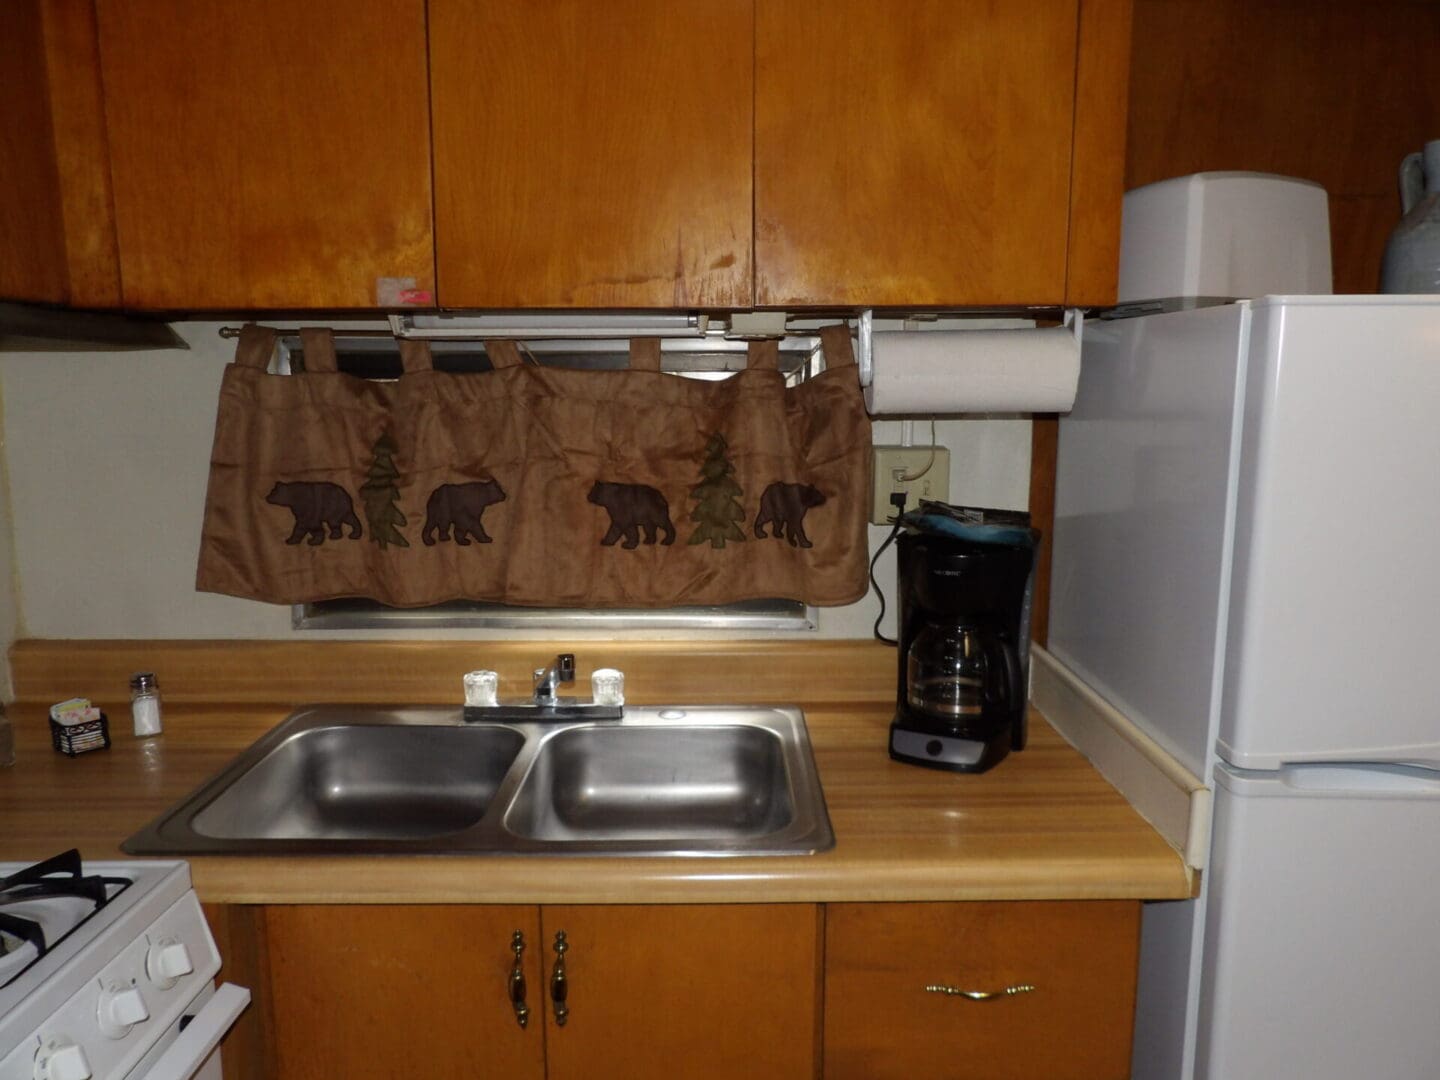 A kitchen with two sinks and a coffee maker.